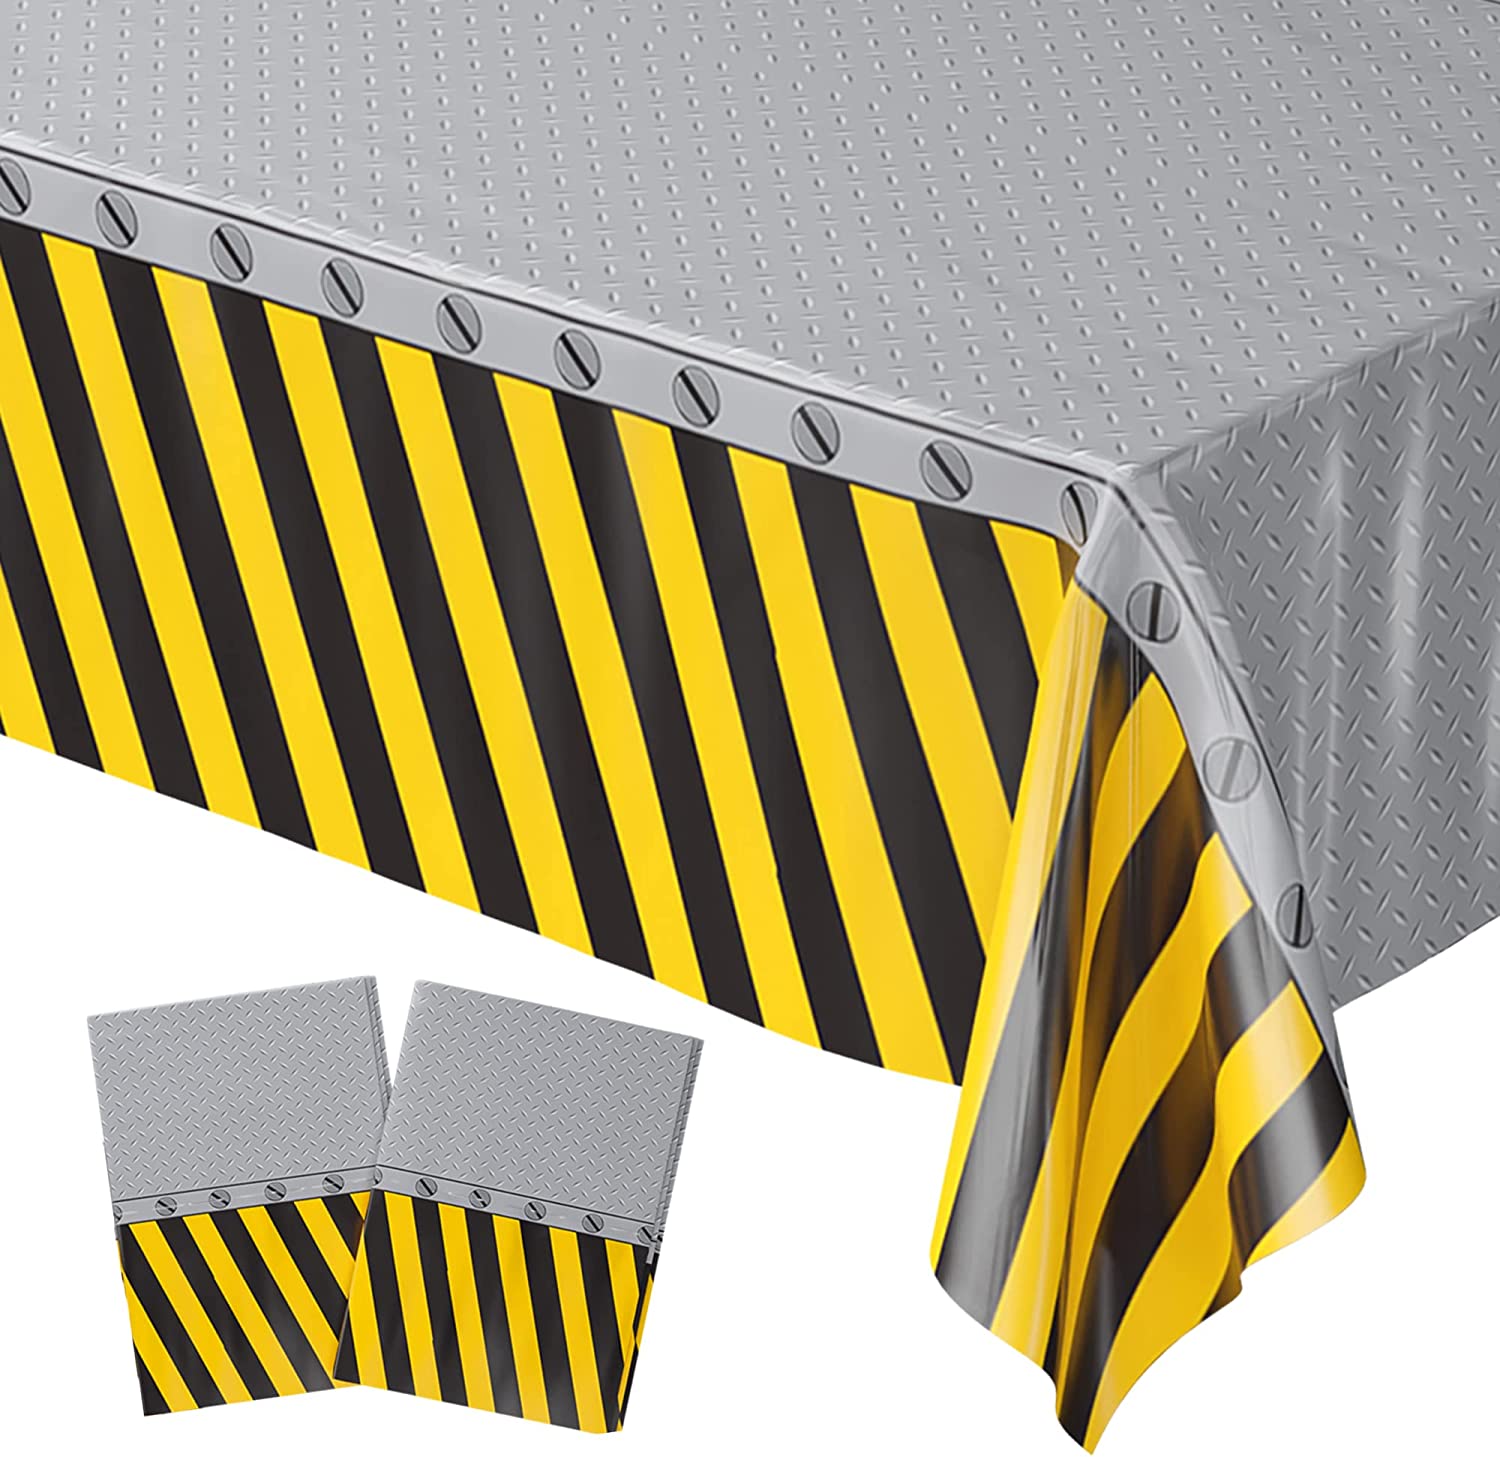 Construction Table Covers (Pack of 2) - 54"x108" XL